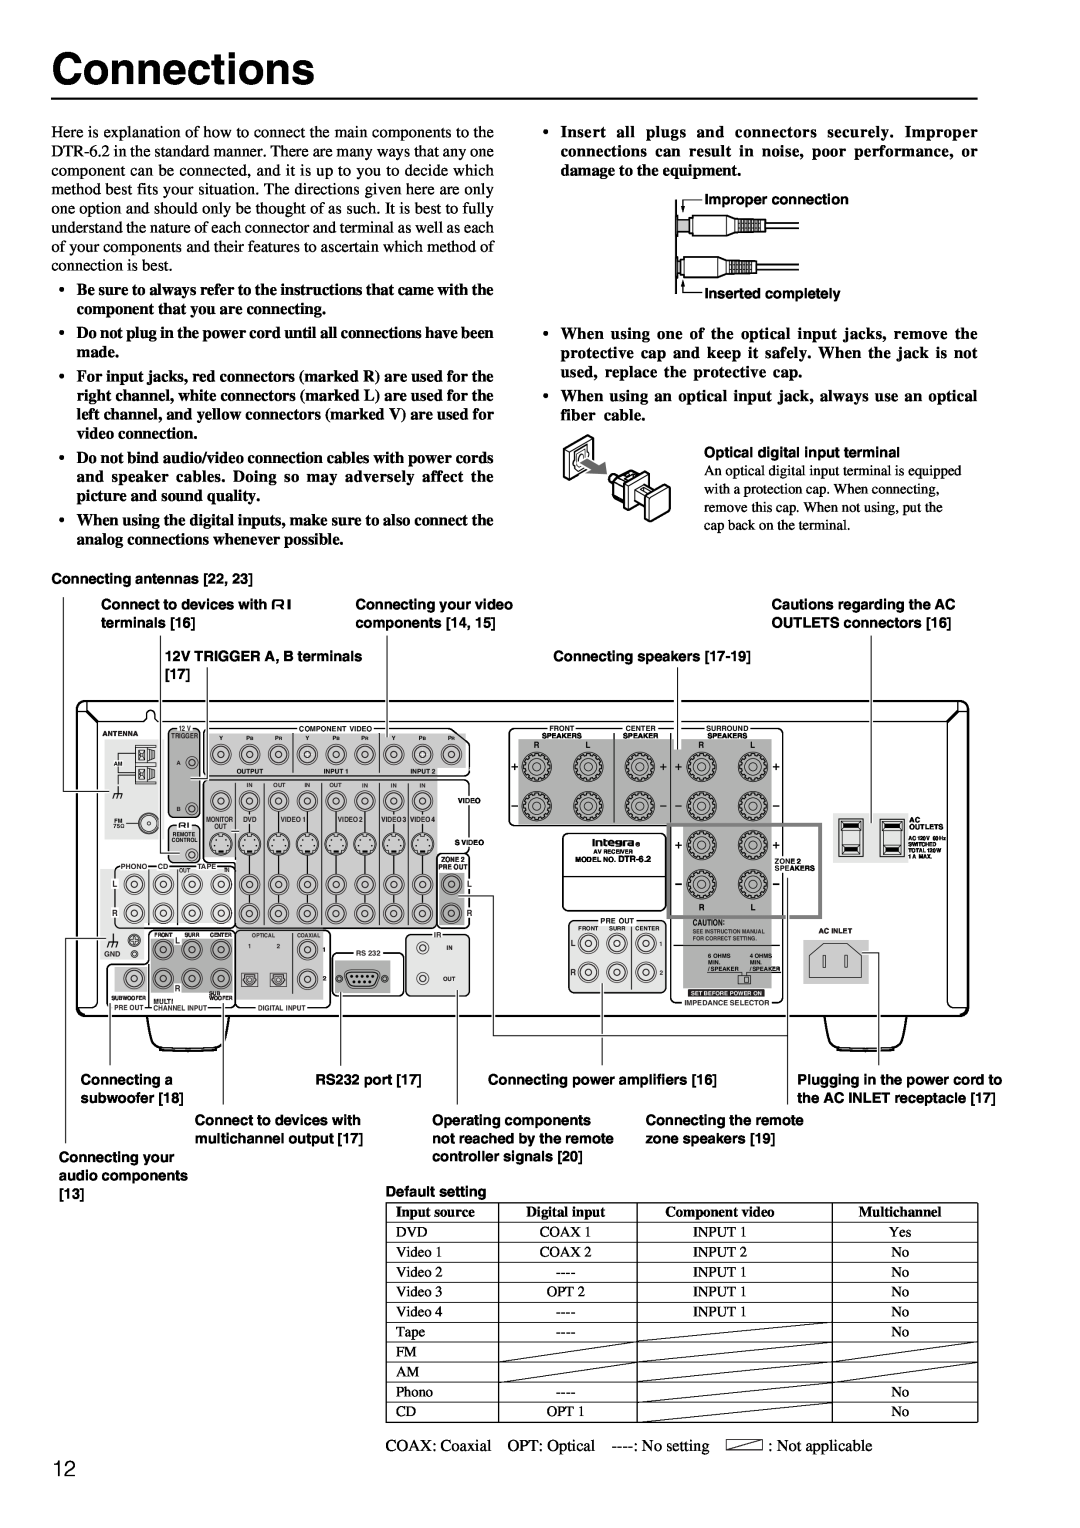 Integra DTR-6.2 instruction manual Connections, COAX Coaxial OPT Optical ---- No setting, Not applicable 